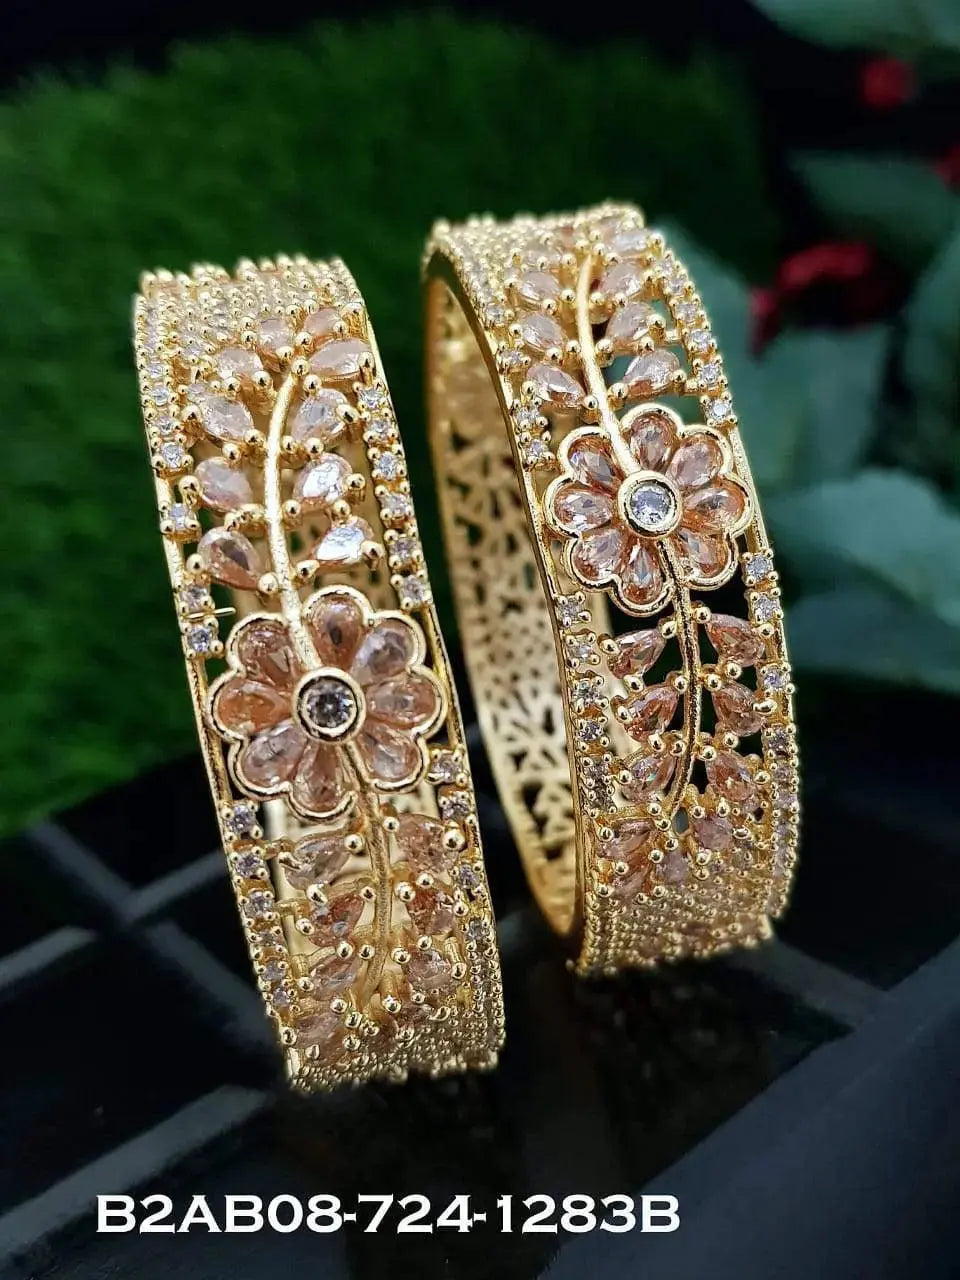 Jeeva Collection LCT Stones Floral Broad Bangles Set of 2 bangles B2AB08-724-1282A